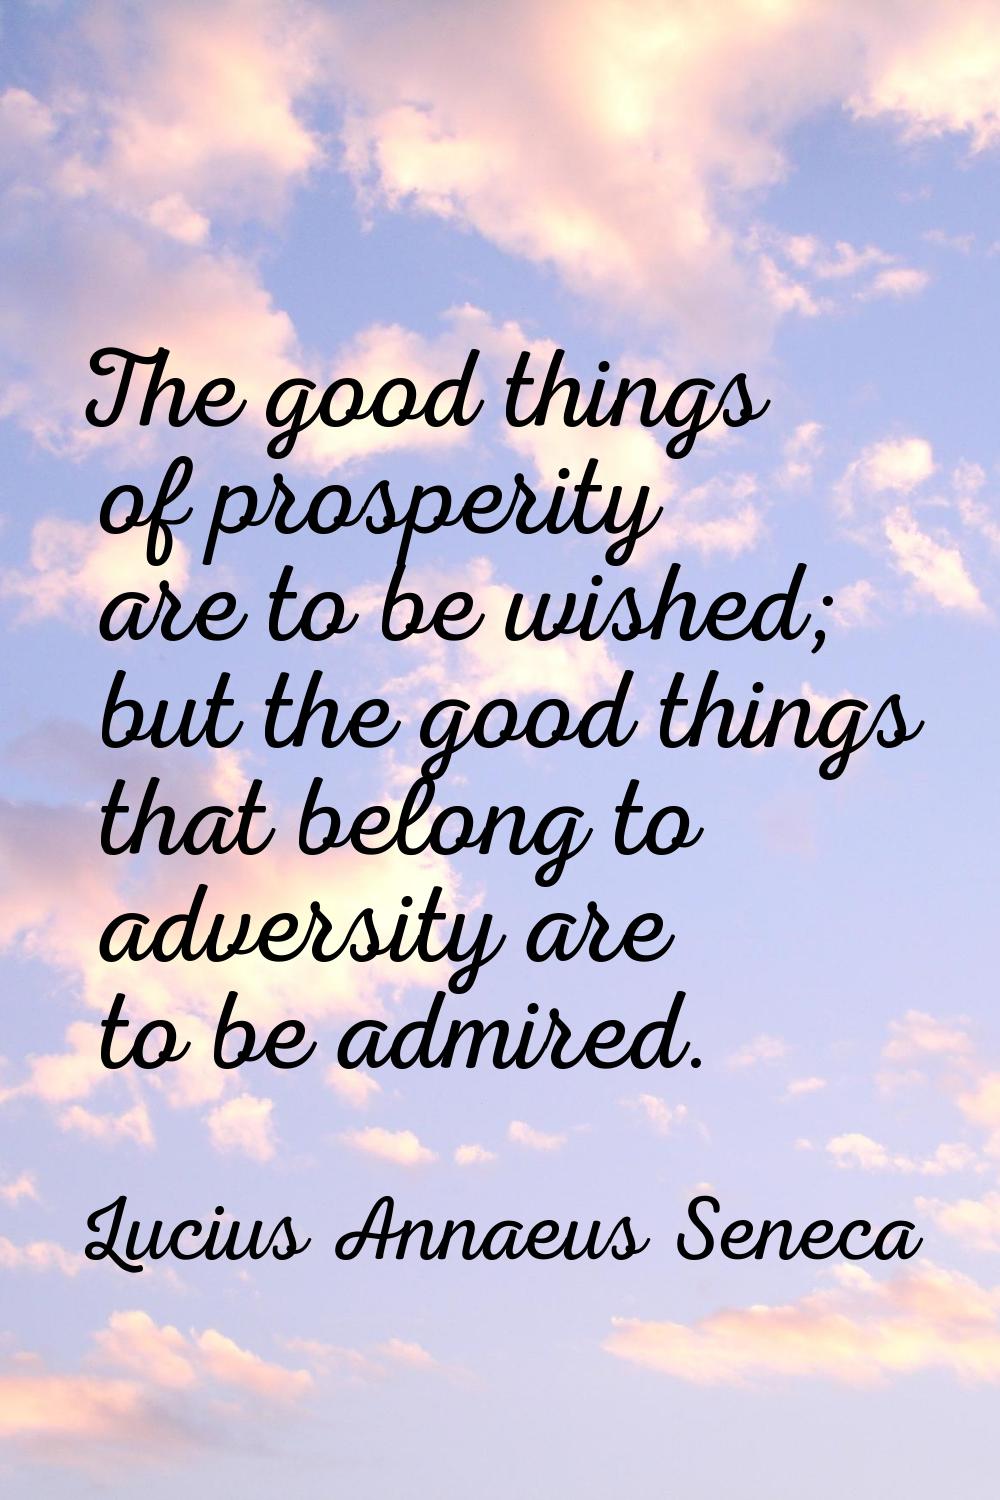 The good things of prosperity are to be wished; but the good things that belong to adversity are to